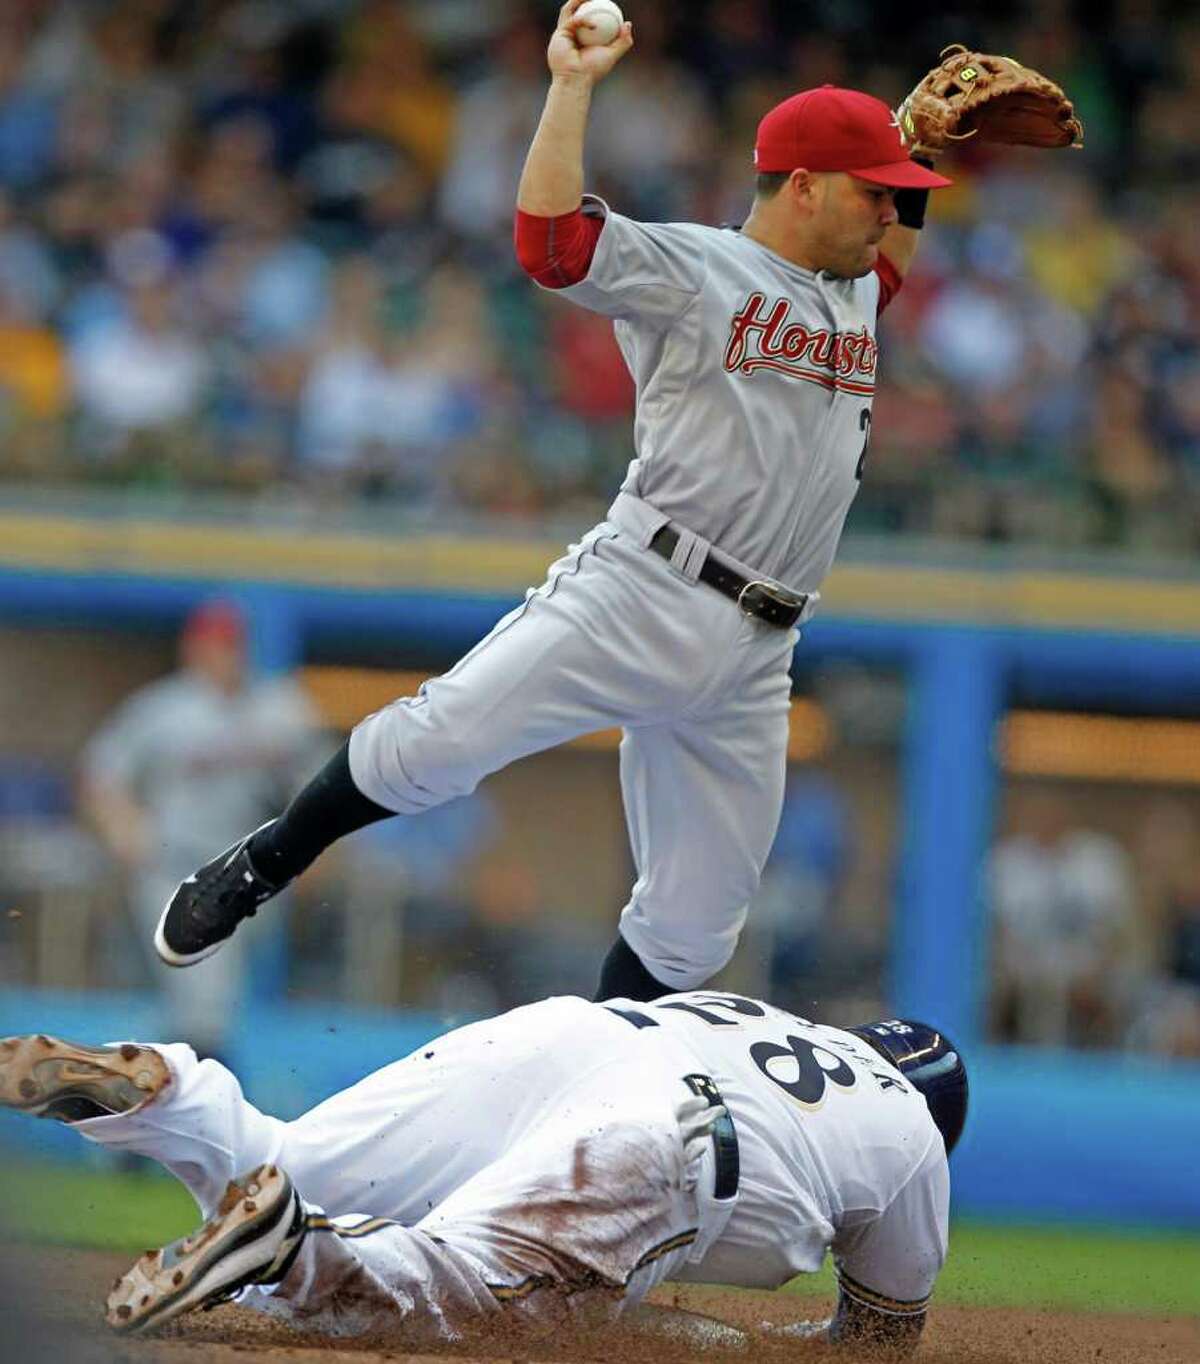 Milwaukee Brewers' Prince Fielder is forced out at second by Houston Astros' Jose Altuve in the sixth inning of a baseball game Sunday, July 31, 2011, in Milwaukee. Yuniesky Betancourt was safe at first base. (AP Photo/Jeffrey Phelps)